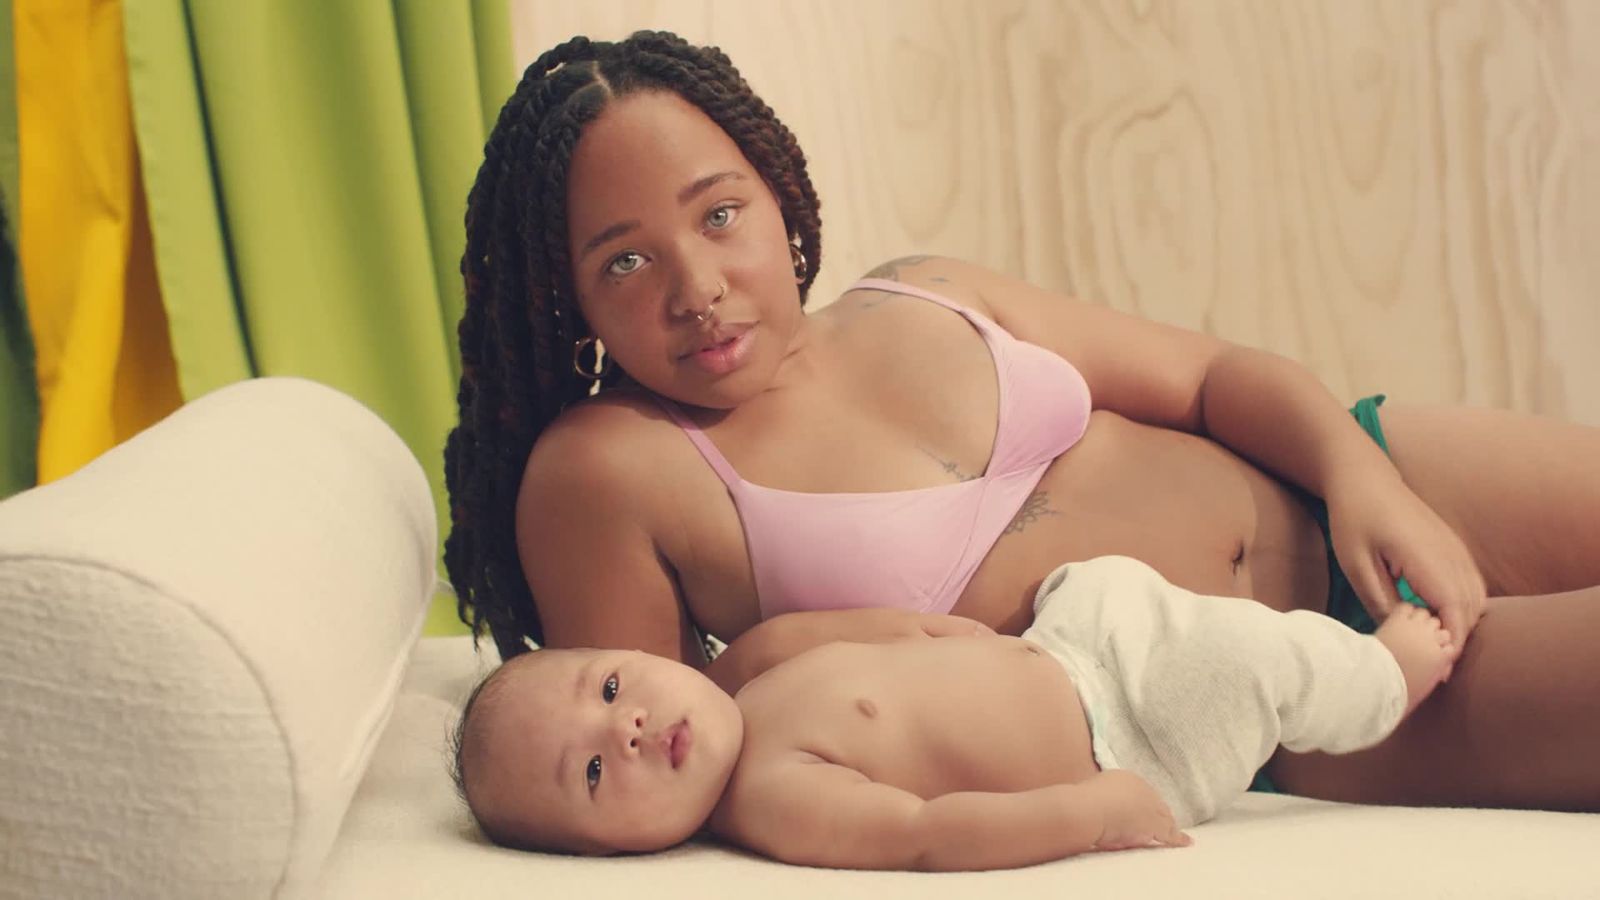 Tommee Tippee - The Boob Life (Director's cut) on Vimeo